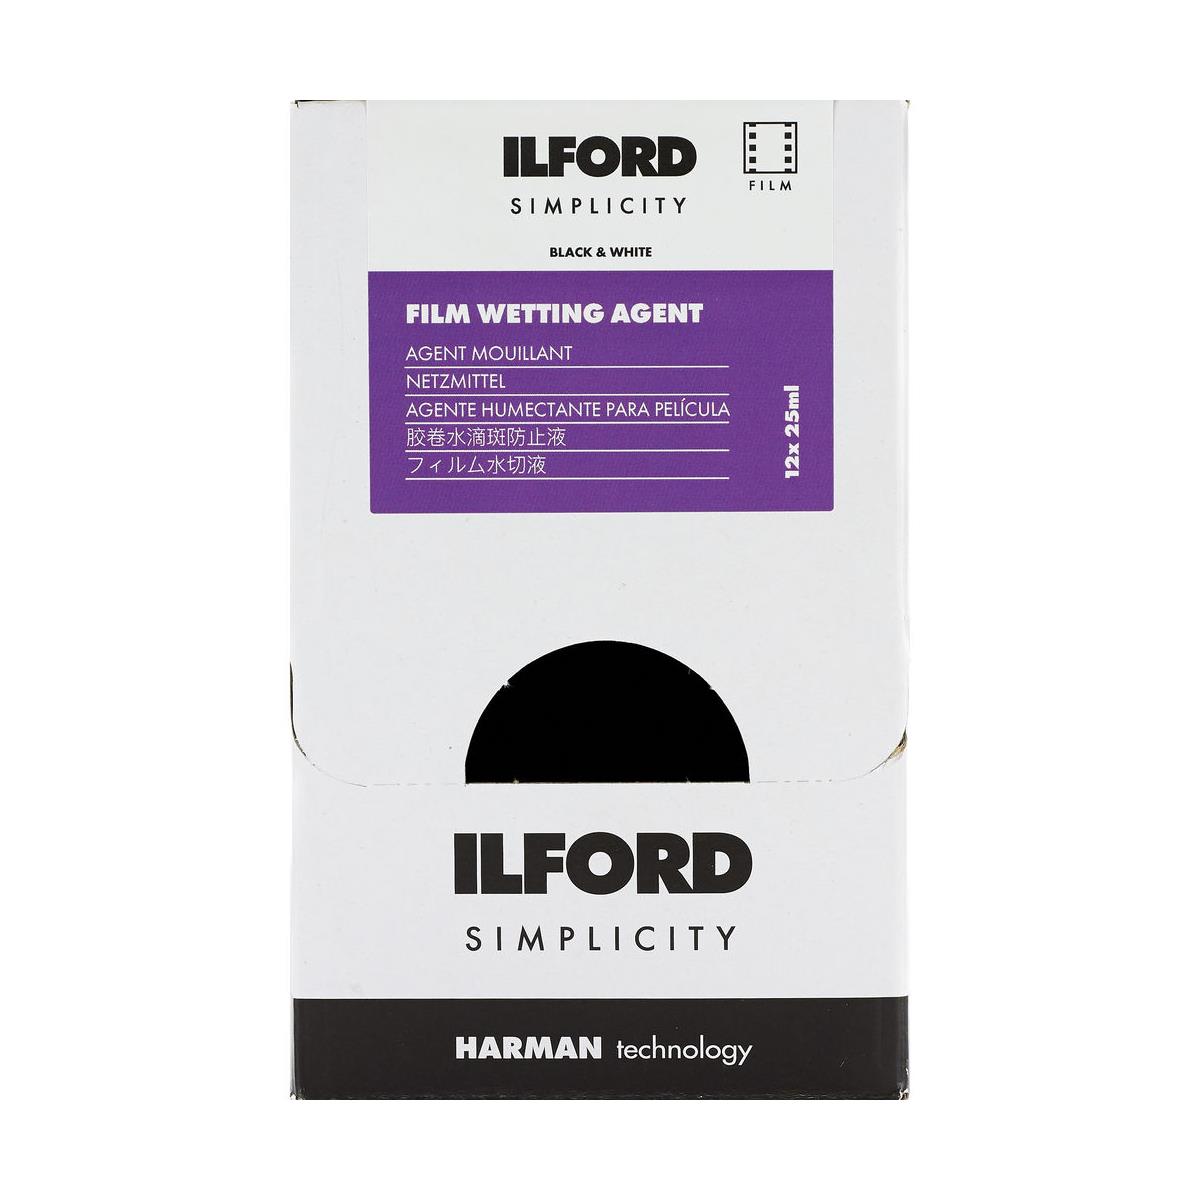 Image of Ilford SIMPLICITY Wetting Agent